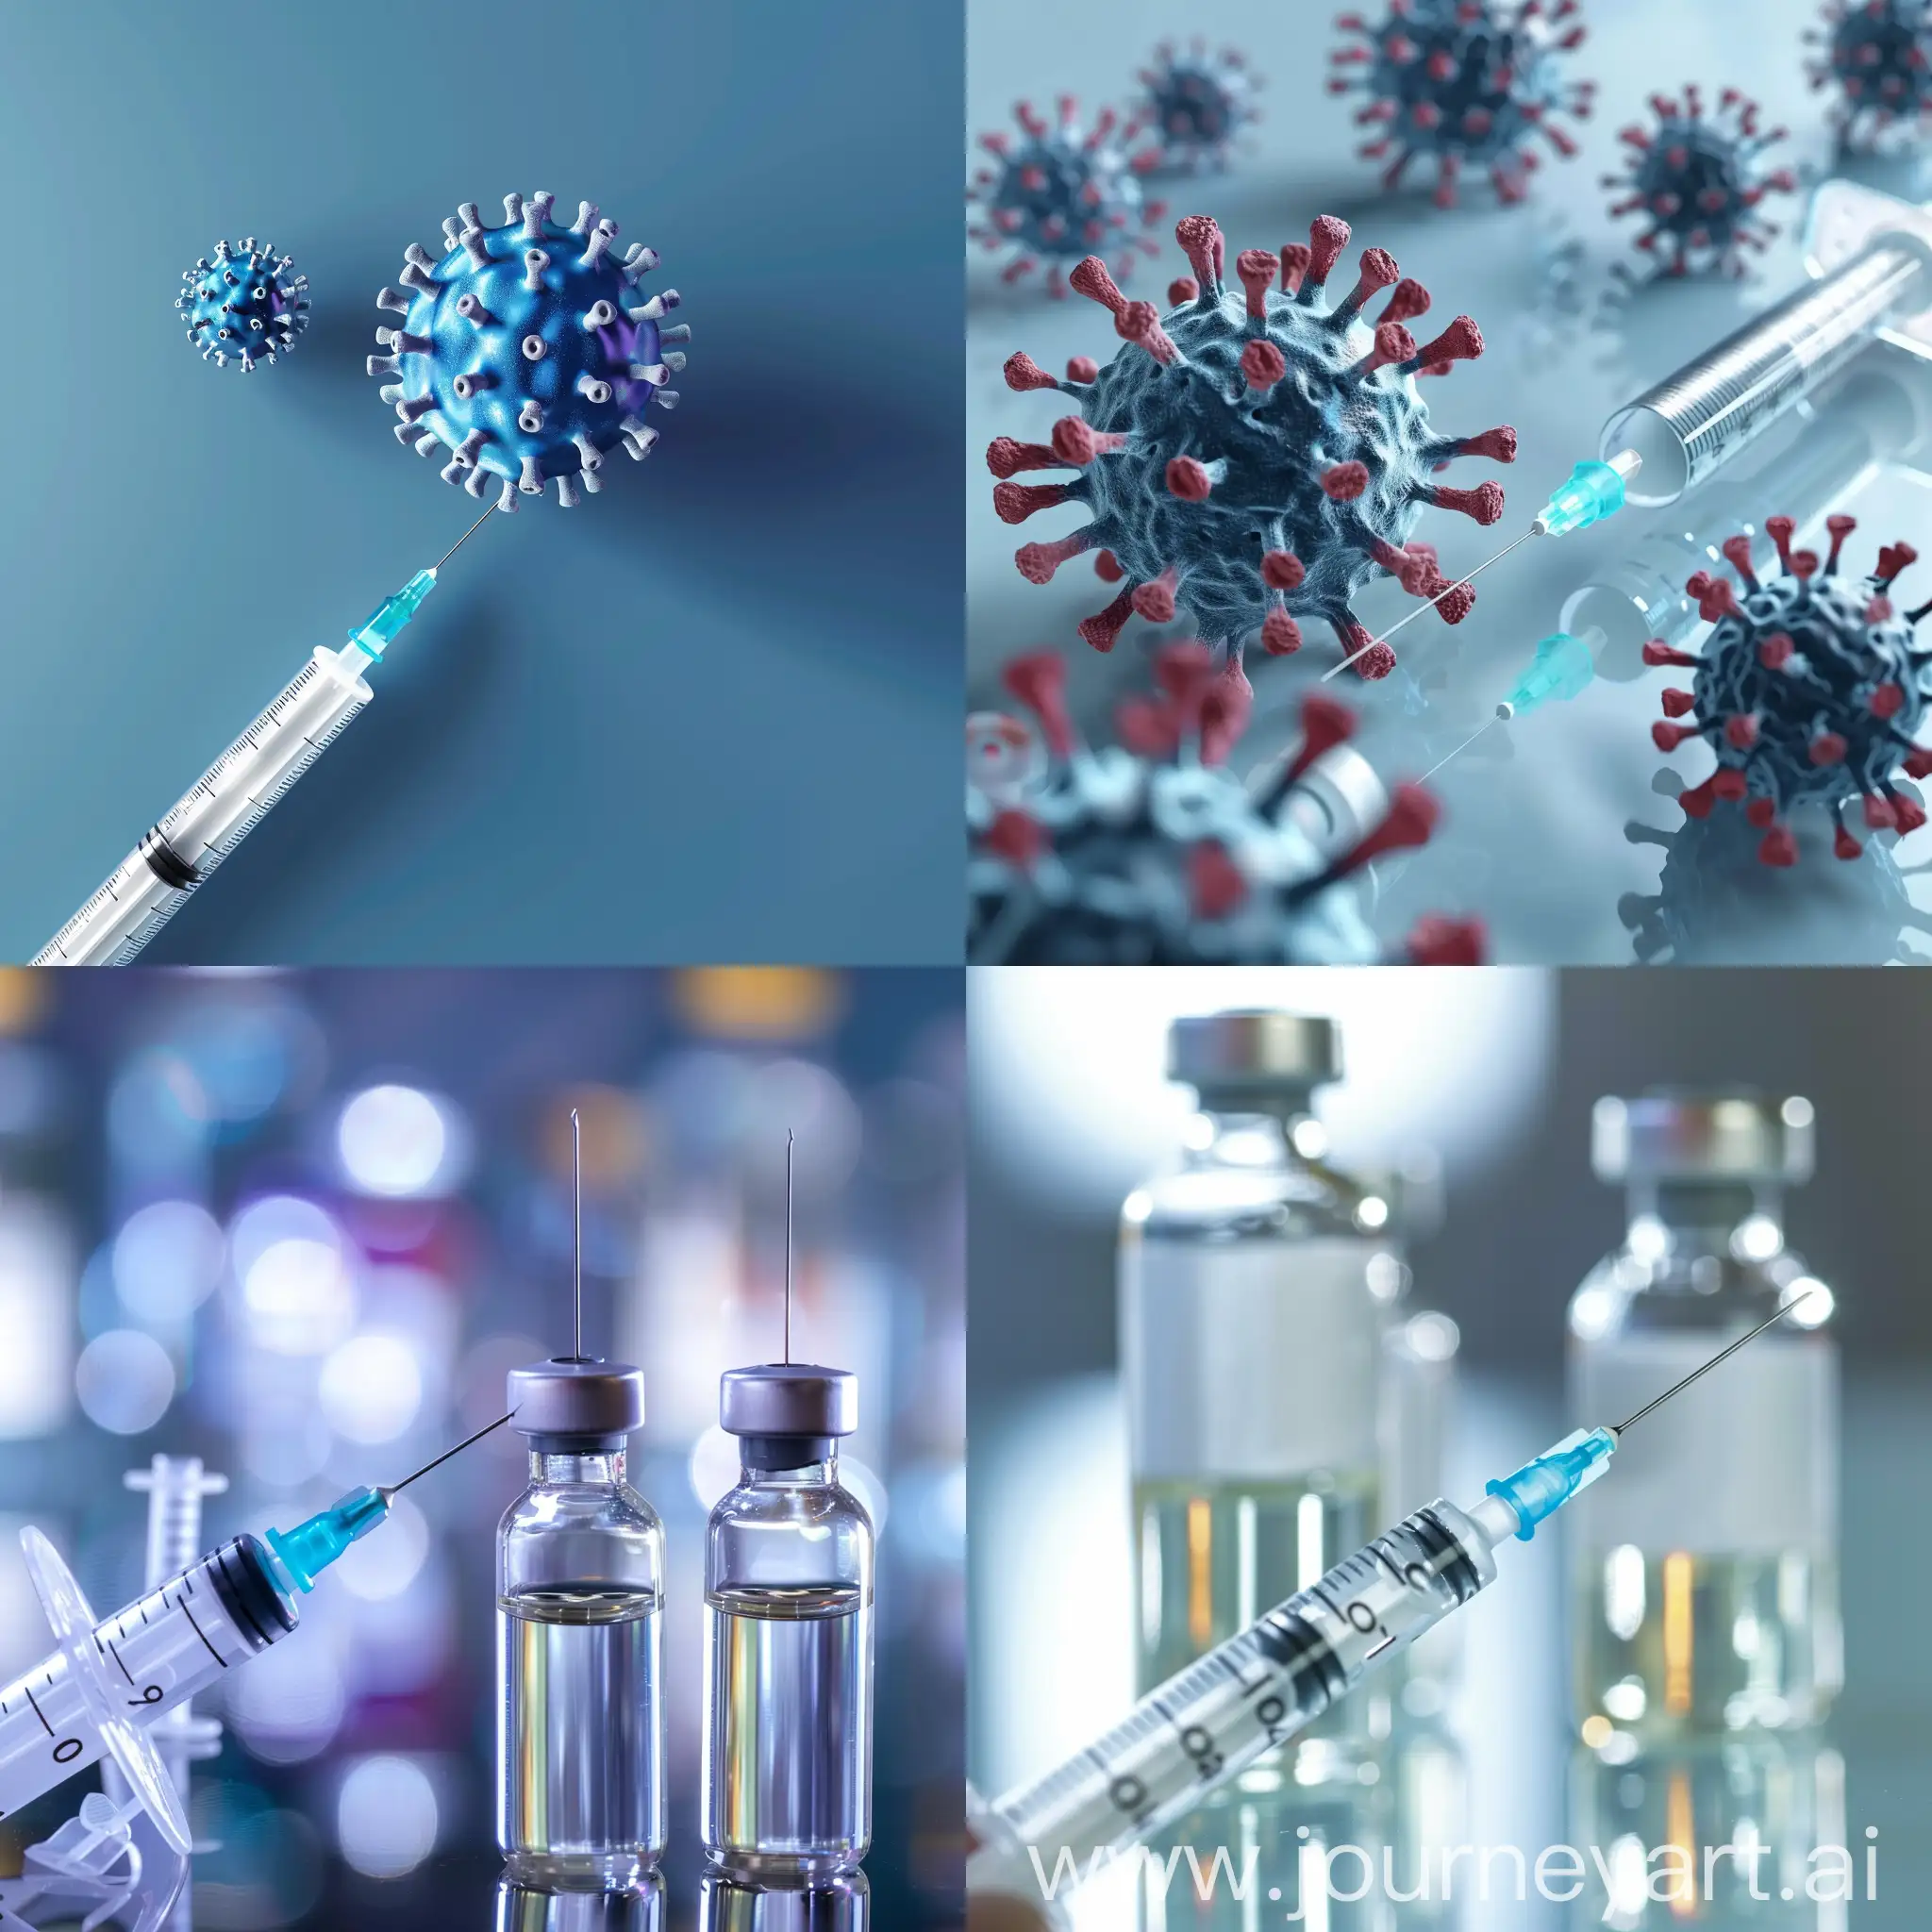 Vaccines protect against viruses